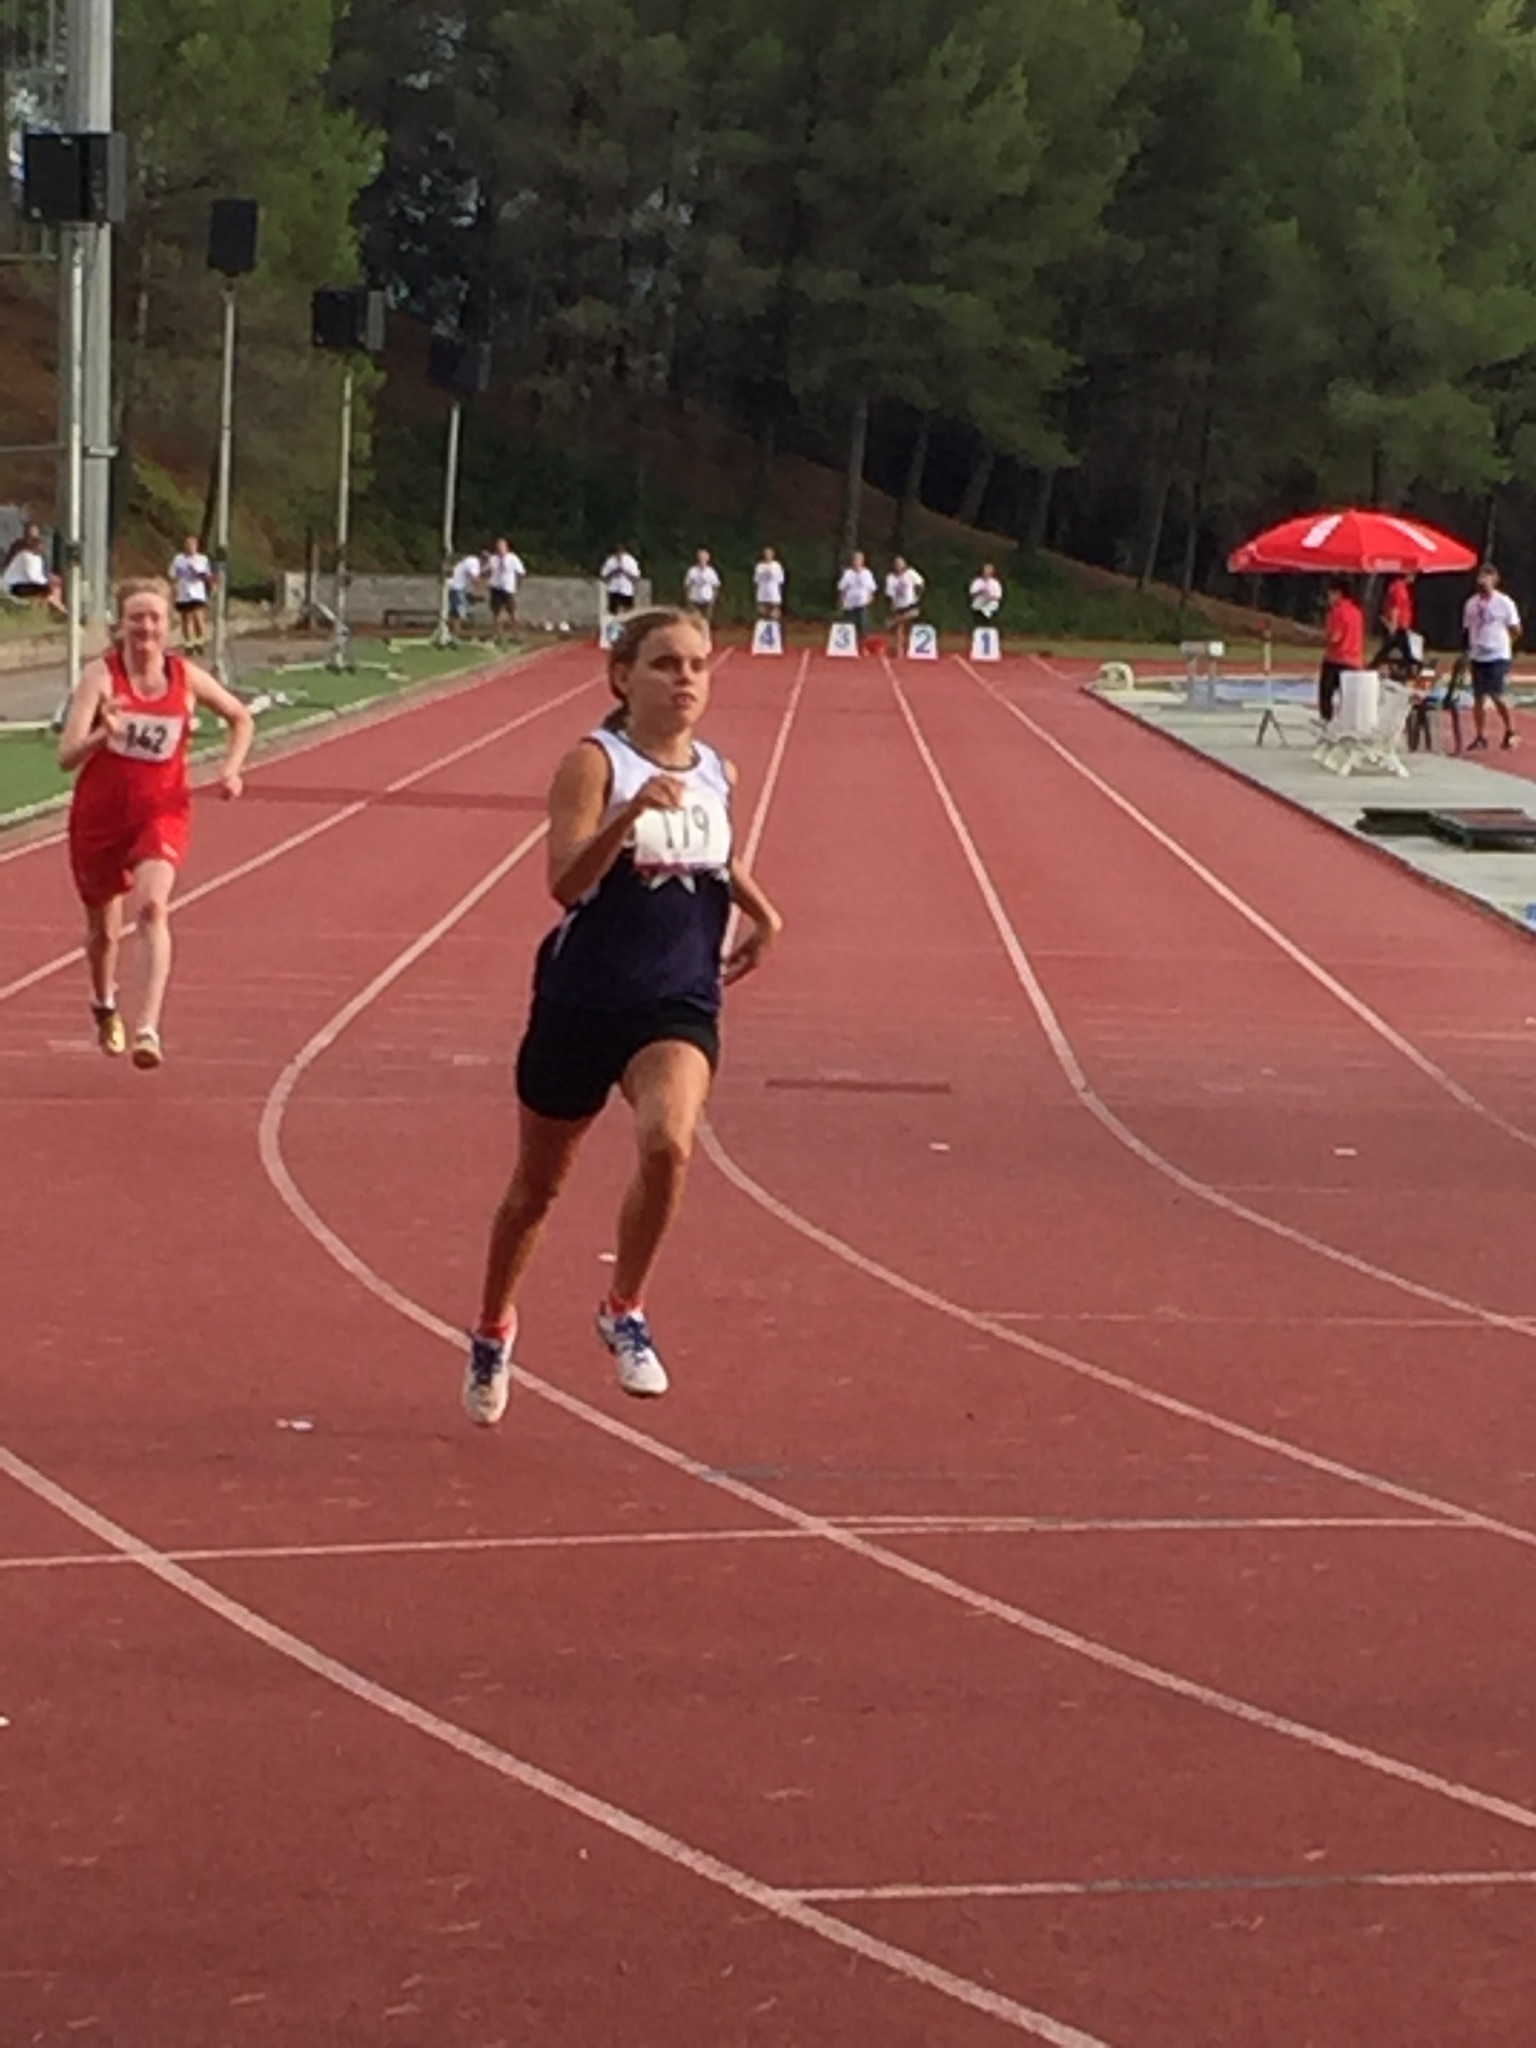 Female athlete running on a track